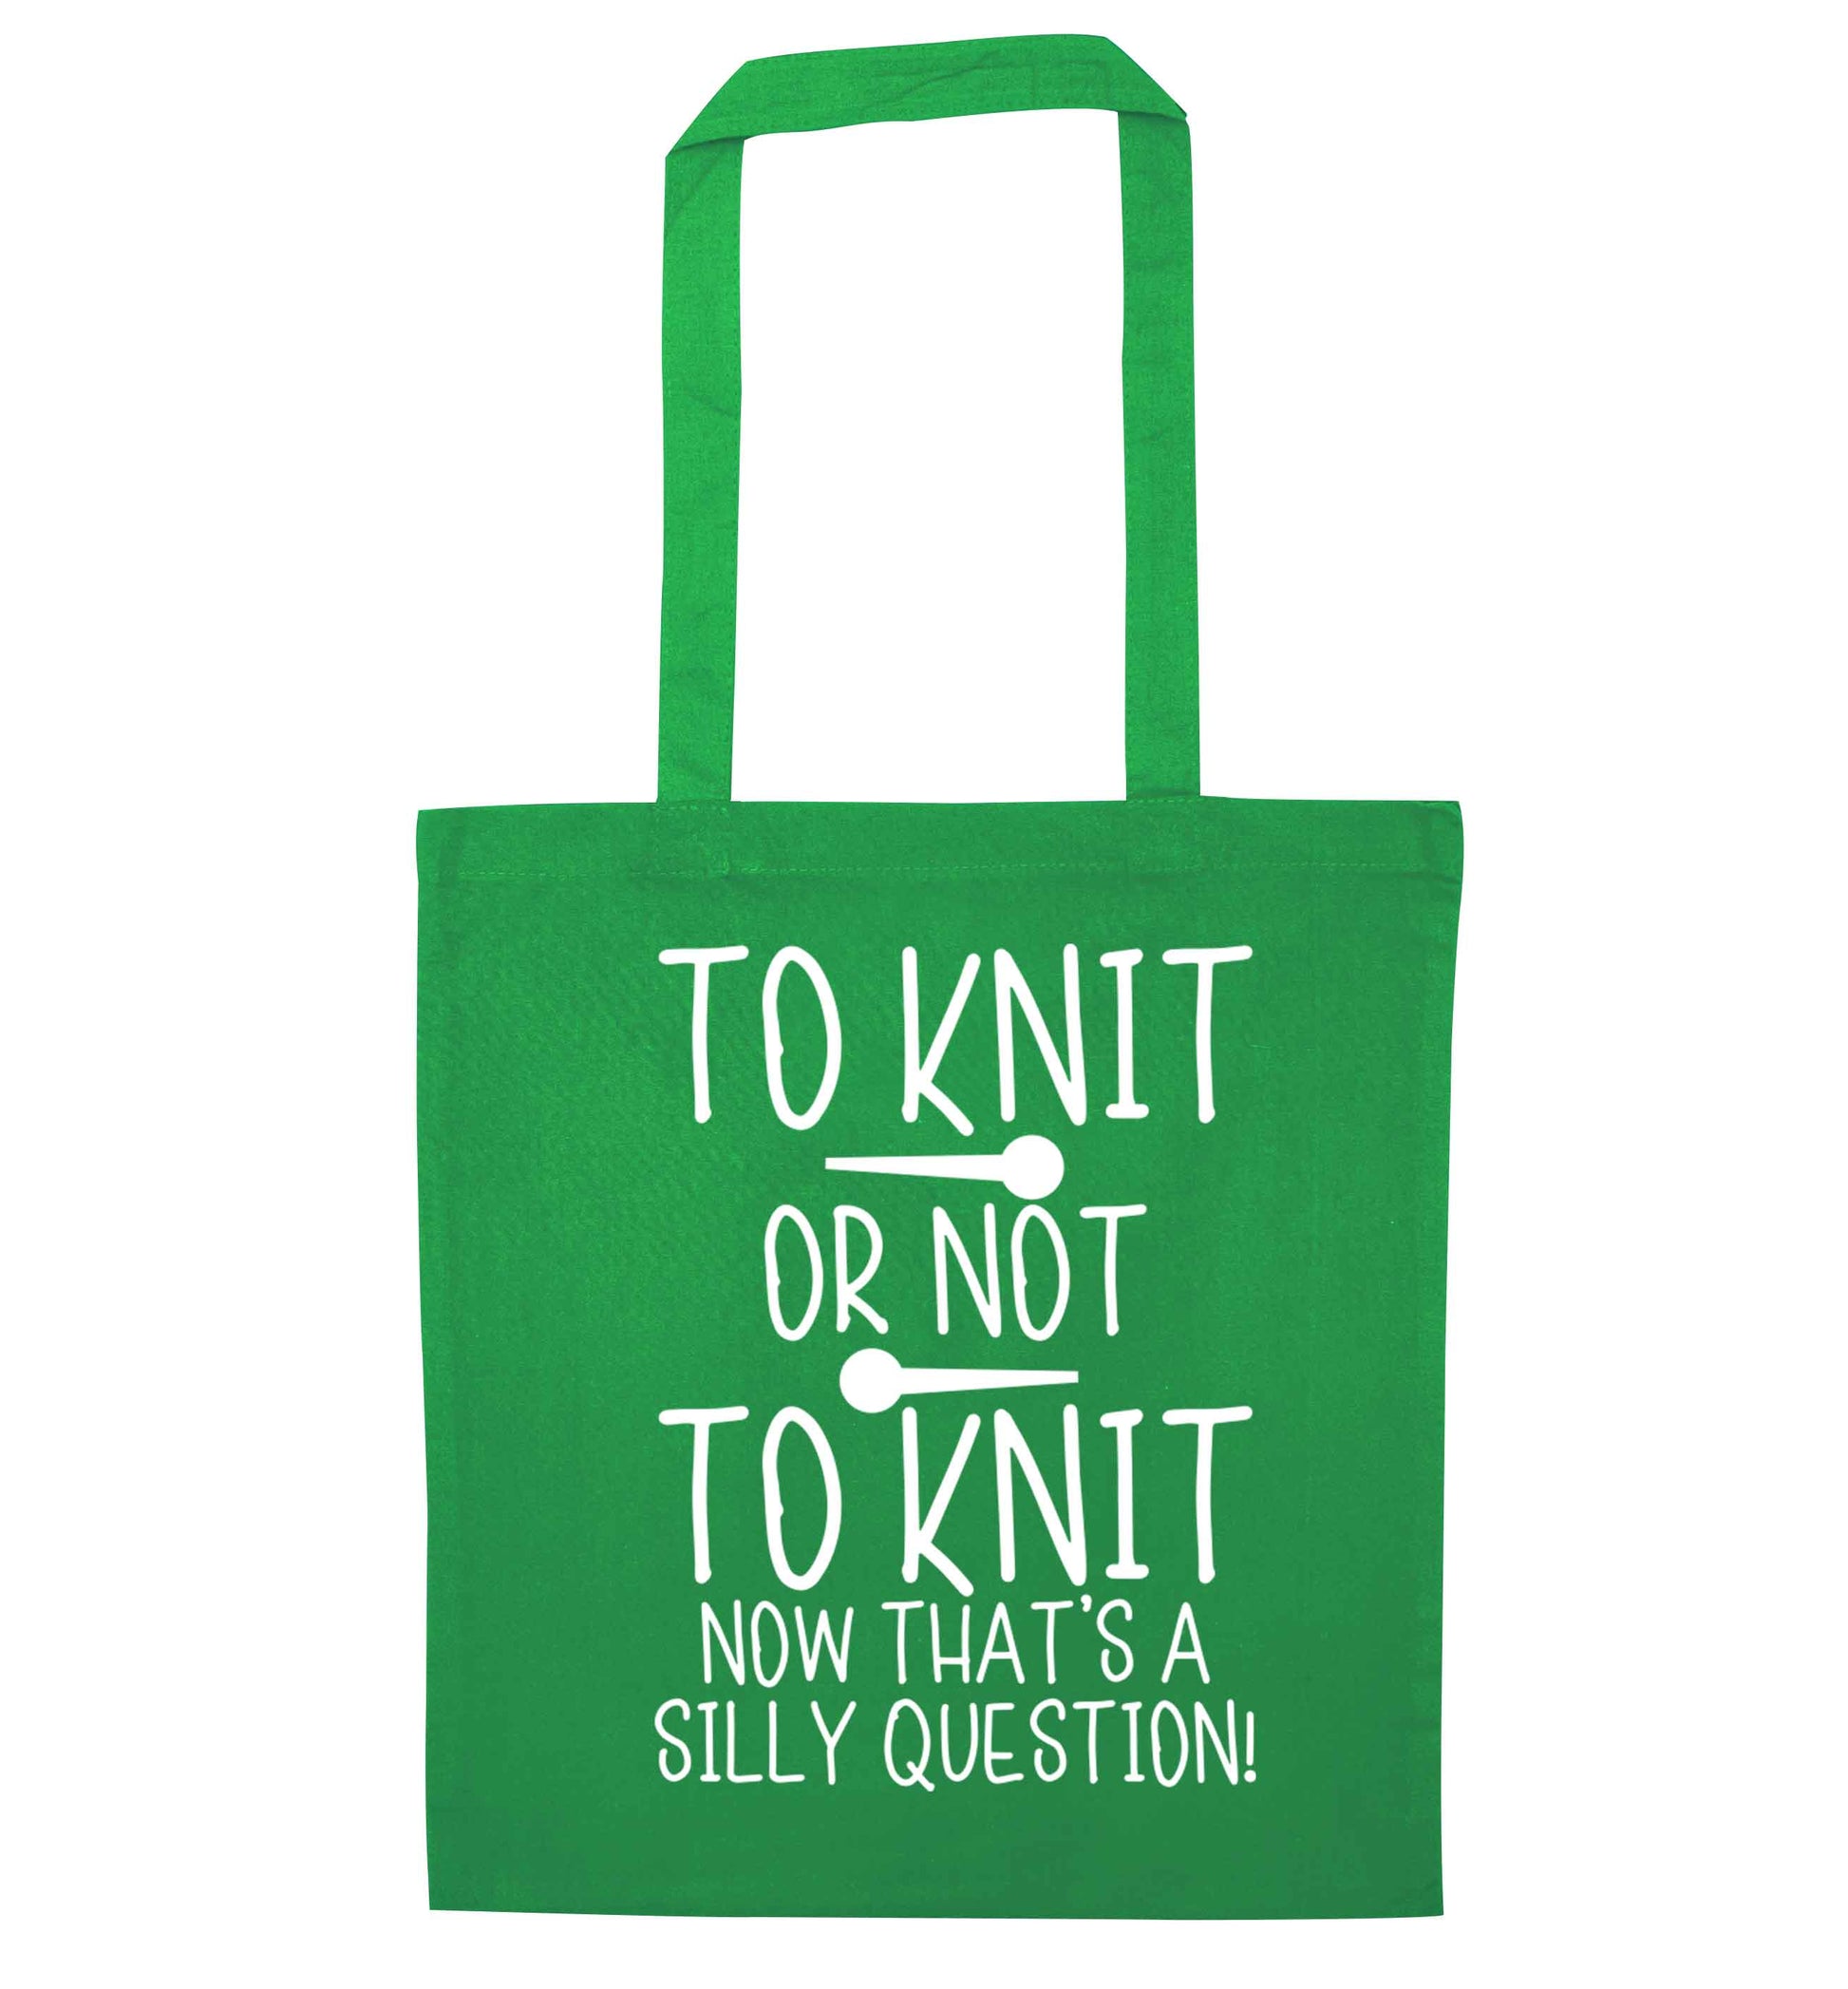 To knit or not to knit now that's a silly question green tote bag